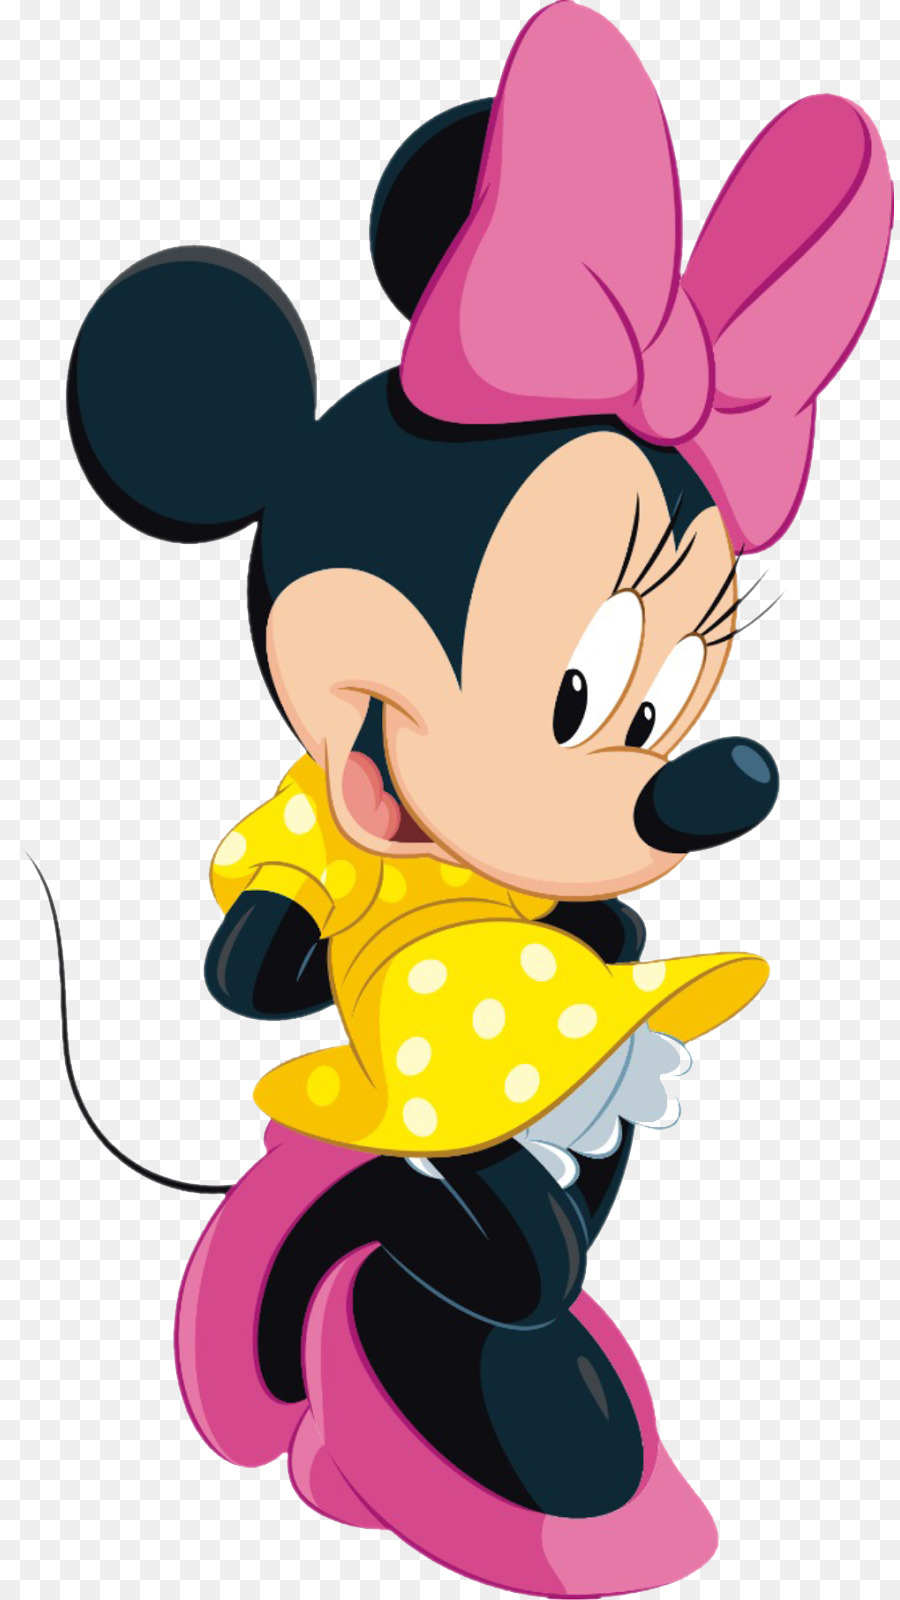 Minnie Mouse Mickey Mouse Daisy Duck Clip art - minnie Mouse png download - 889*1600 - Free Transparent Minnie Mouse png Download.